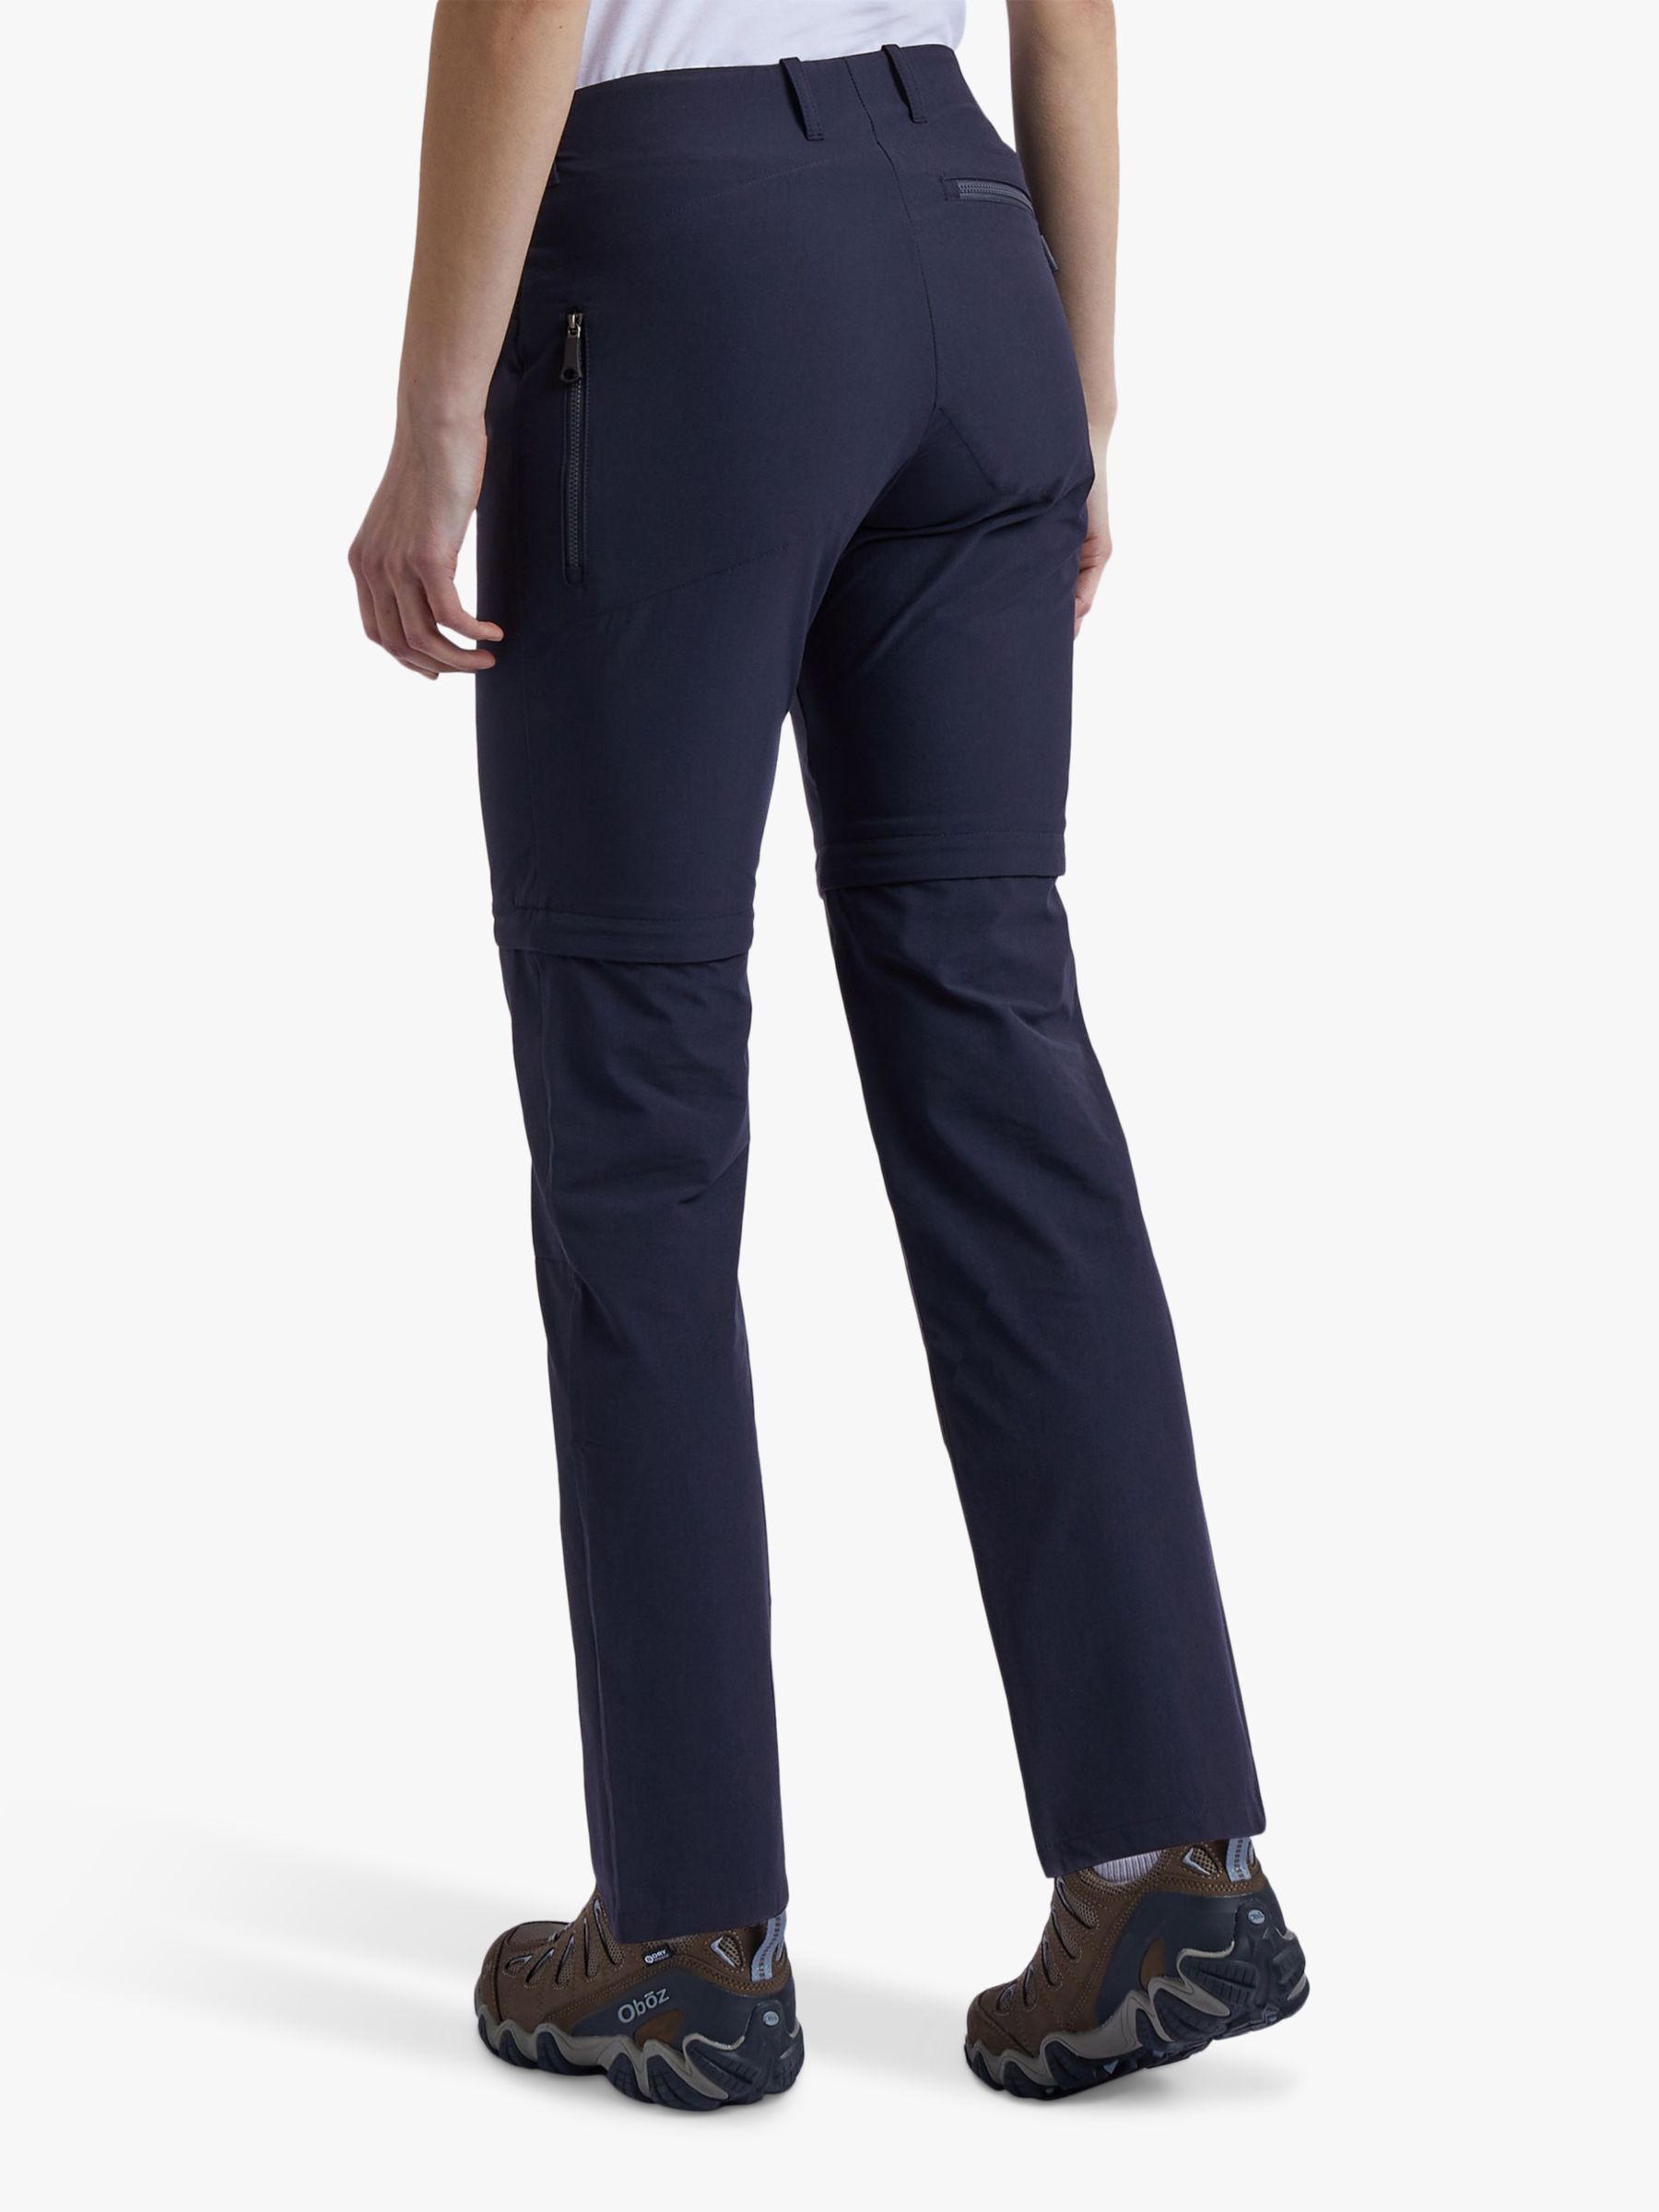 Rohan Stretch Bags Convertible Walking Trousers at John Lewis & Partners